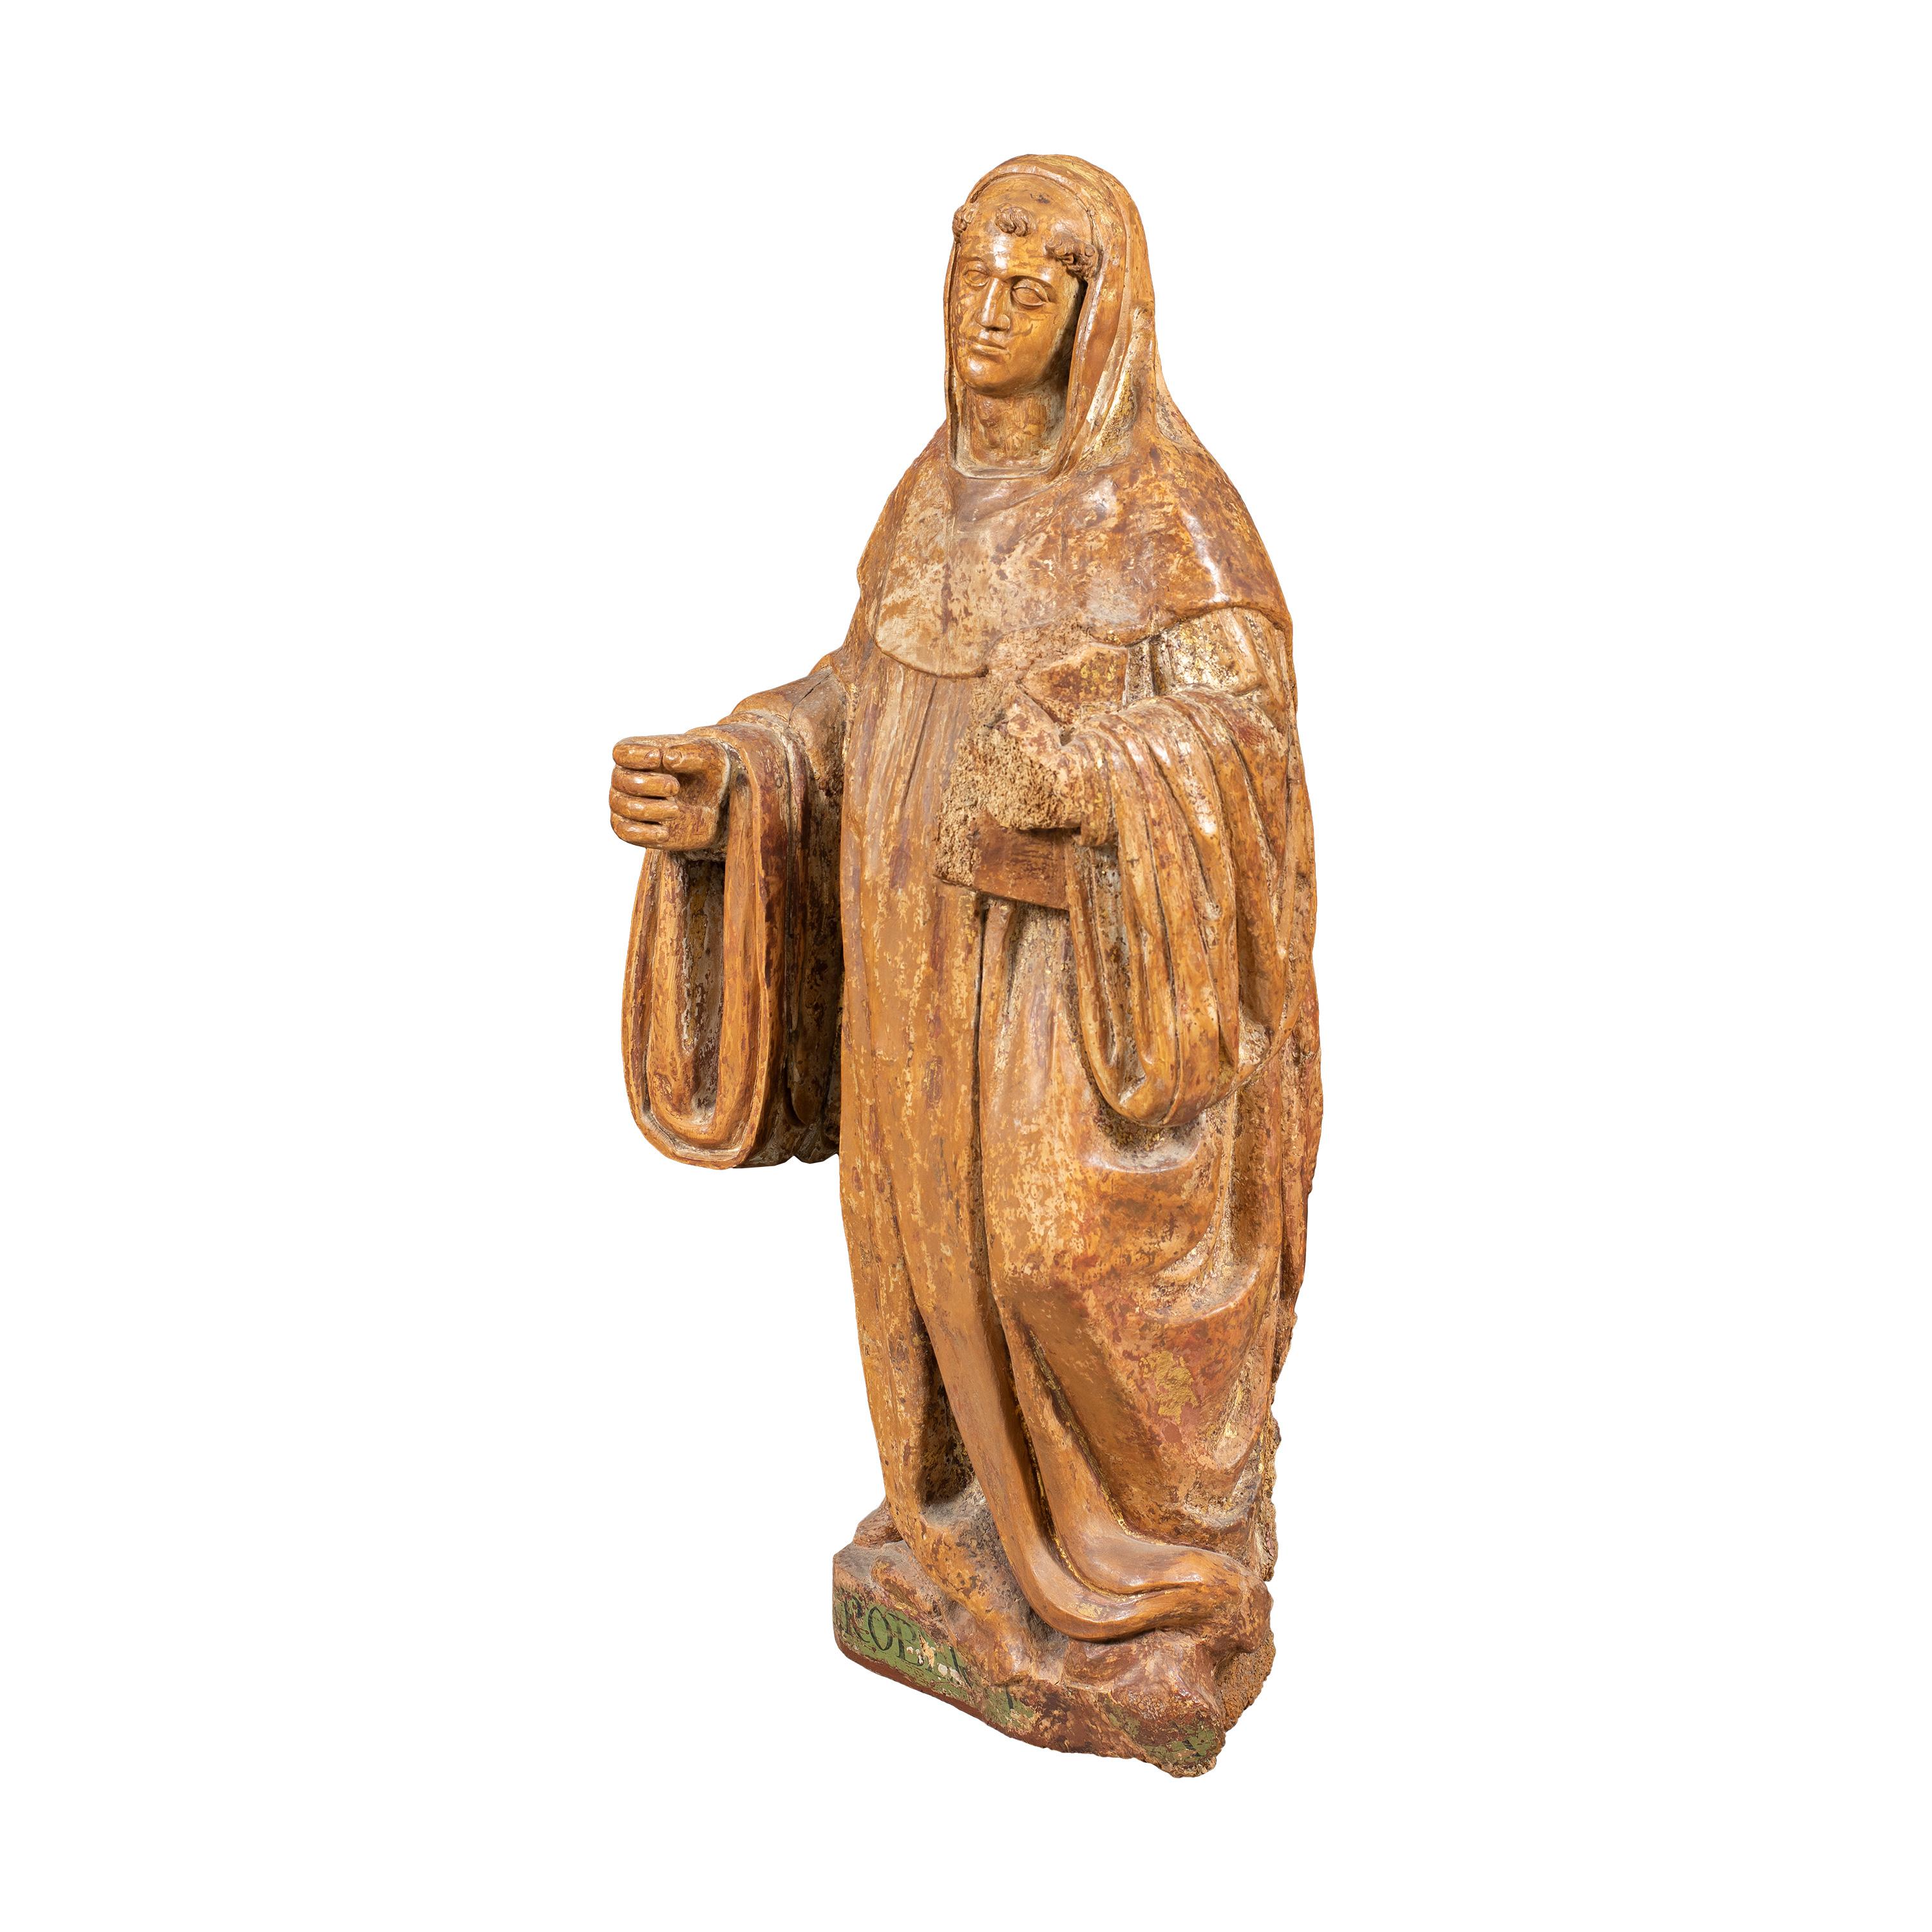 16th century Italian carved wood sculpture - Saint Robert - Gilded Painted - Sculpture by Unknown